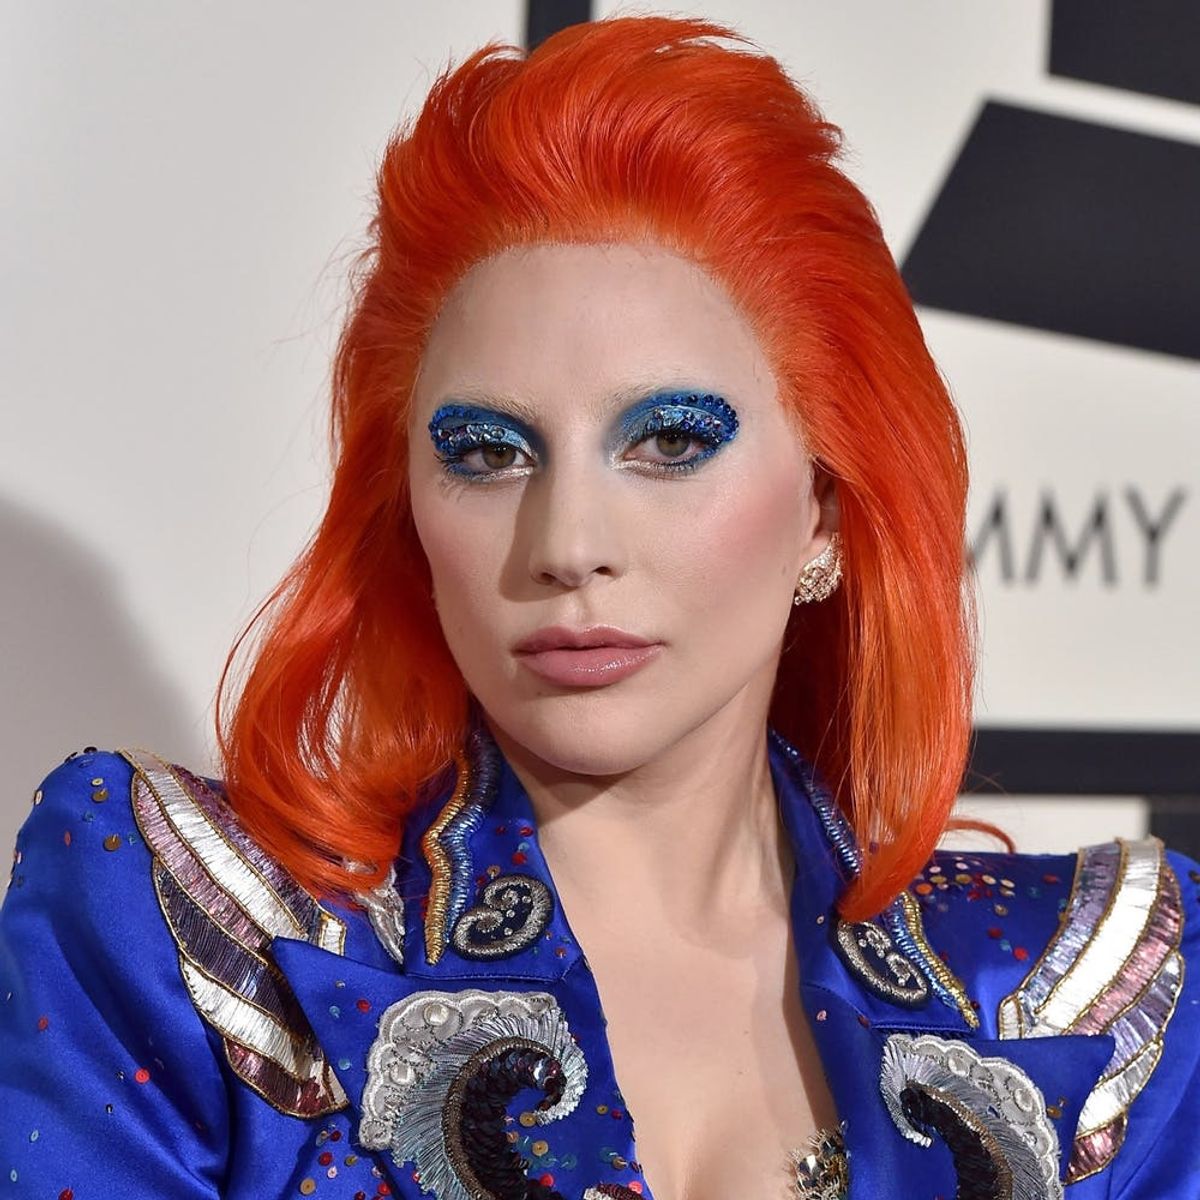 20 Grammys Looks That Will Be Seared into Our Memories ‘Til the End of Time